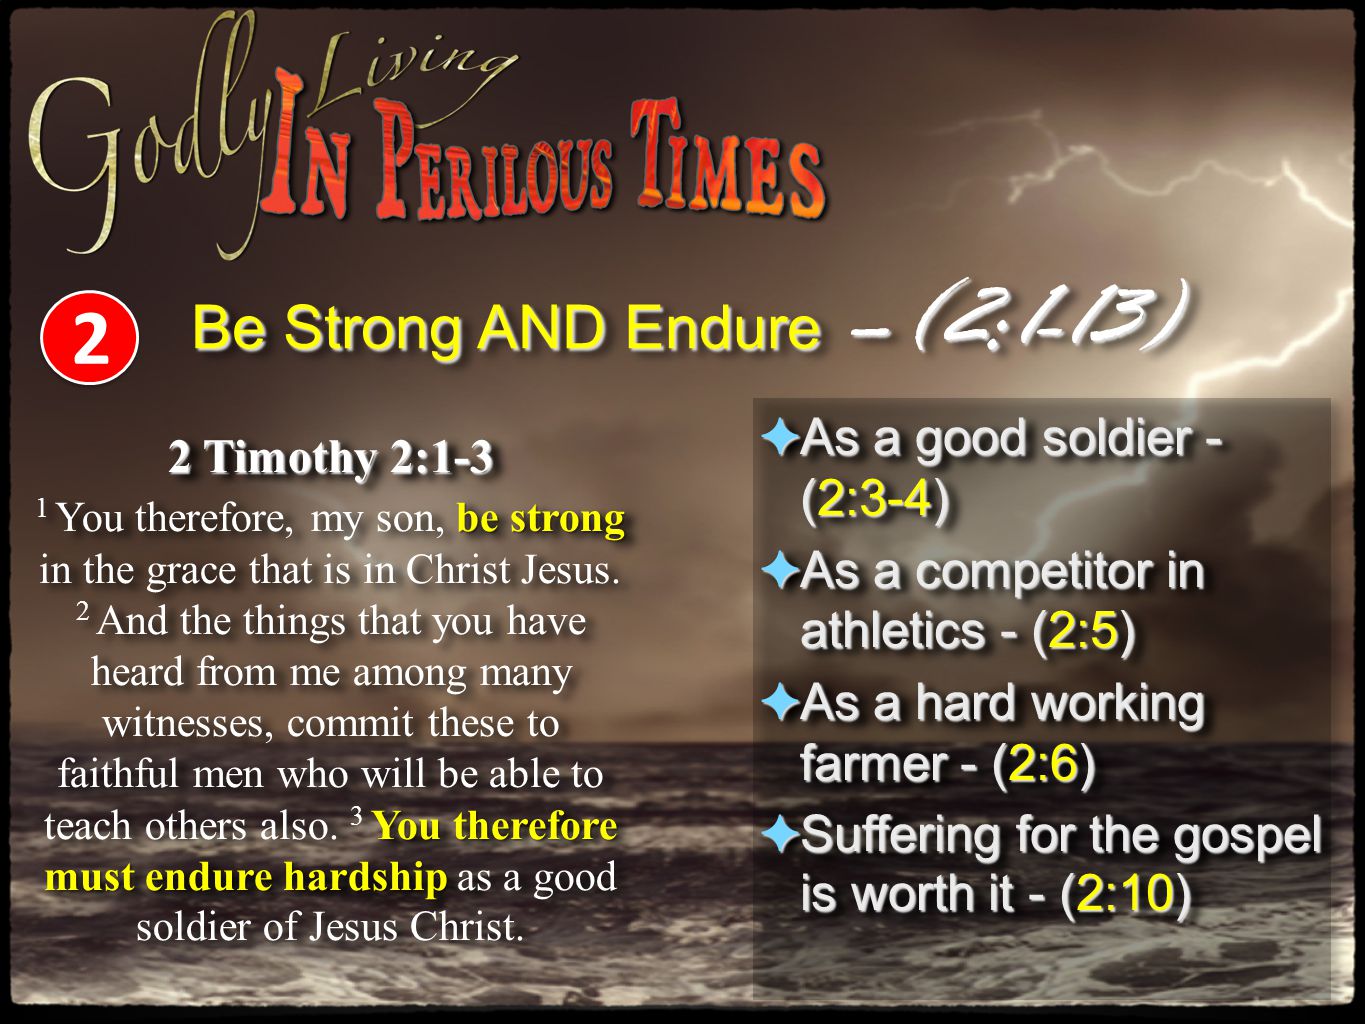 Be Strong AND Endure –(2:1-13)